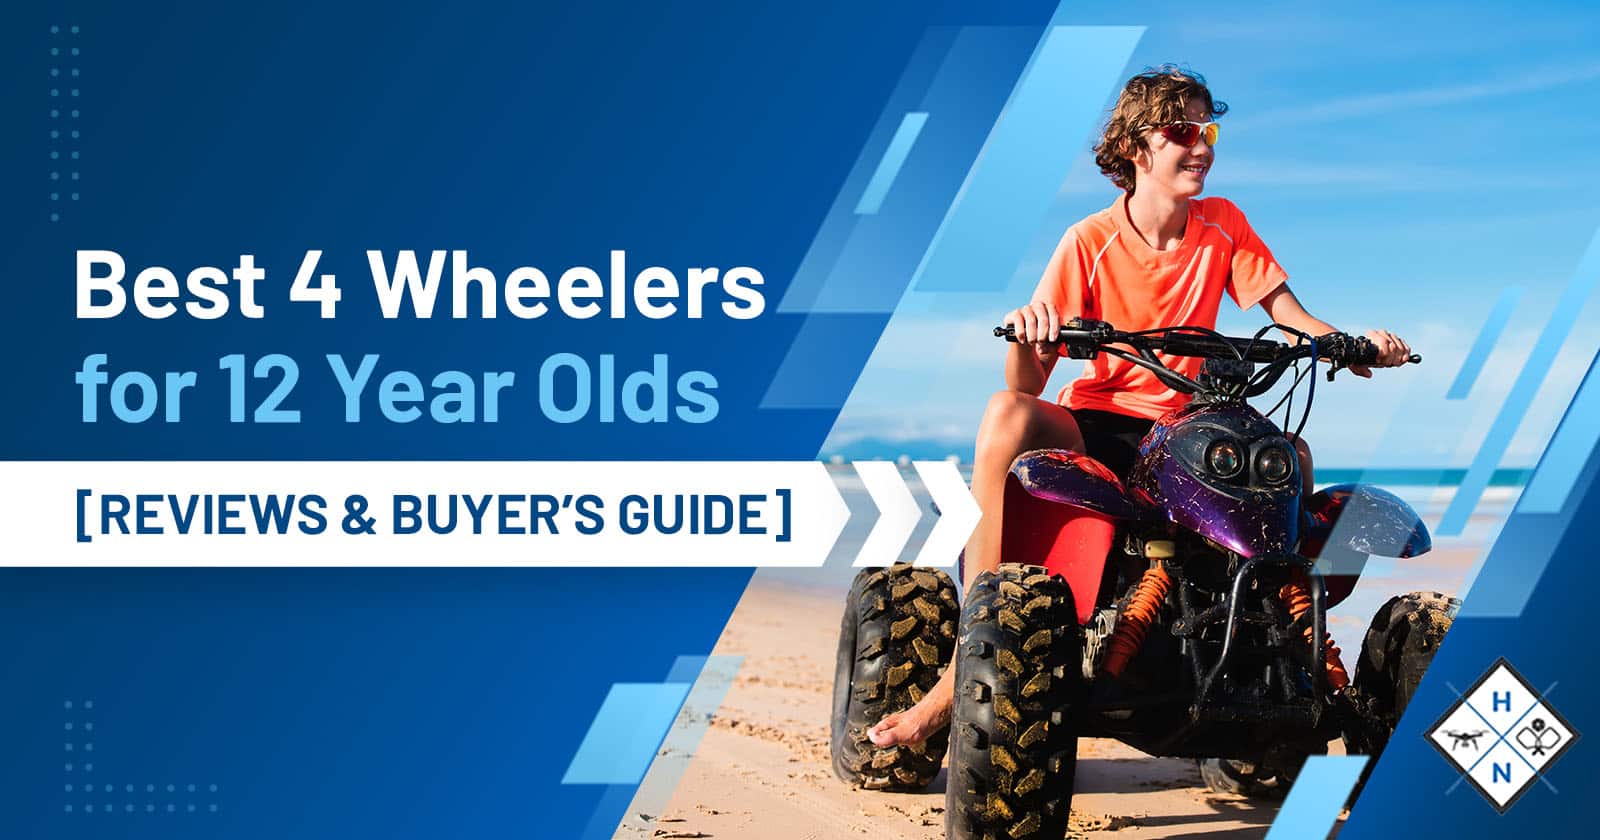 Best 4 Wheelers for 12 Year Olds [REVIEWS &#038; BUYER'S GUIDE]